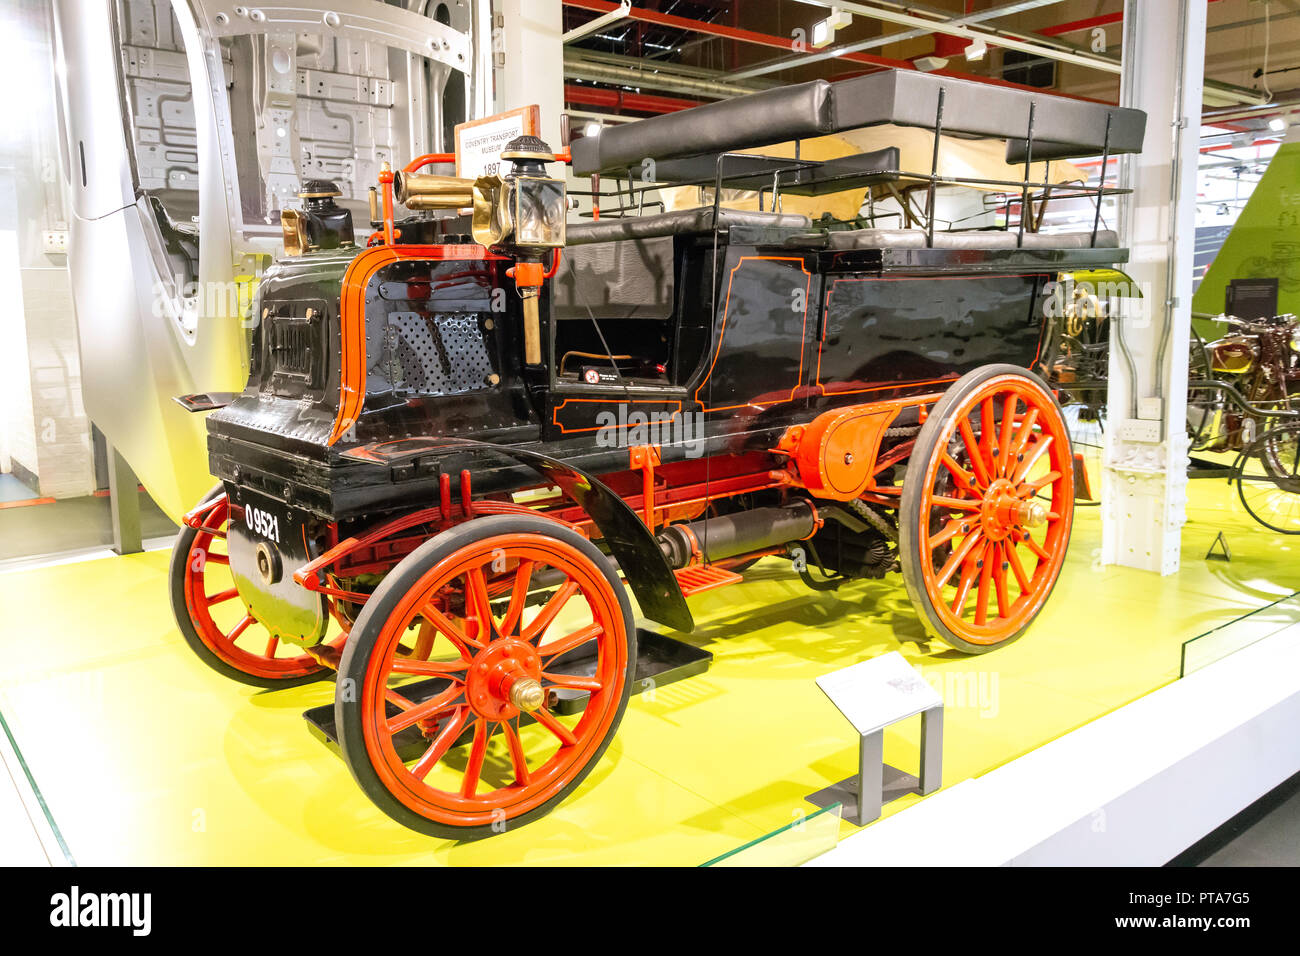 1897 Daimler Wagonette, Coventry Transport Museum, Millennium Place, Coventry, West Midlands, England, United Kingdom Stock Photo